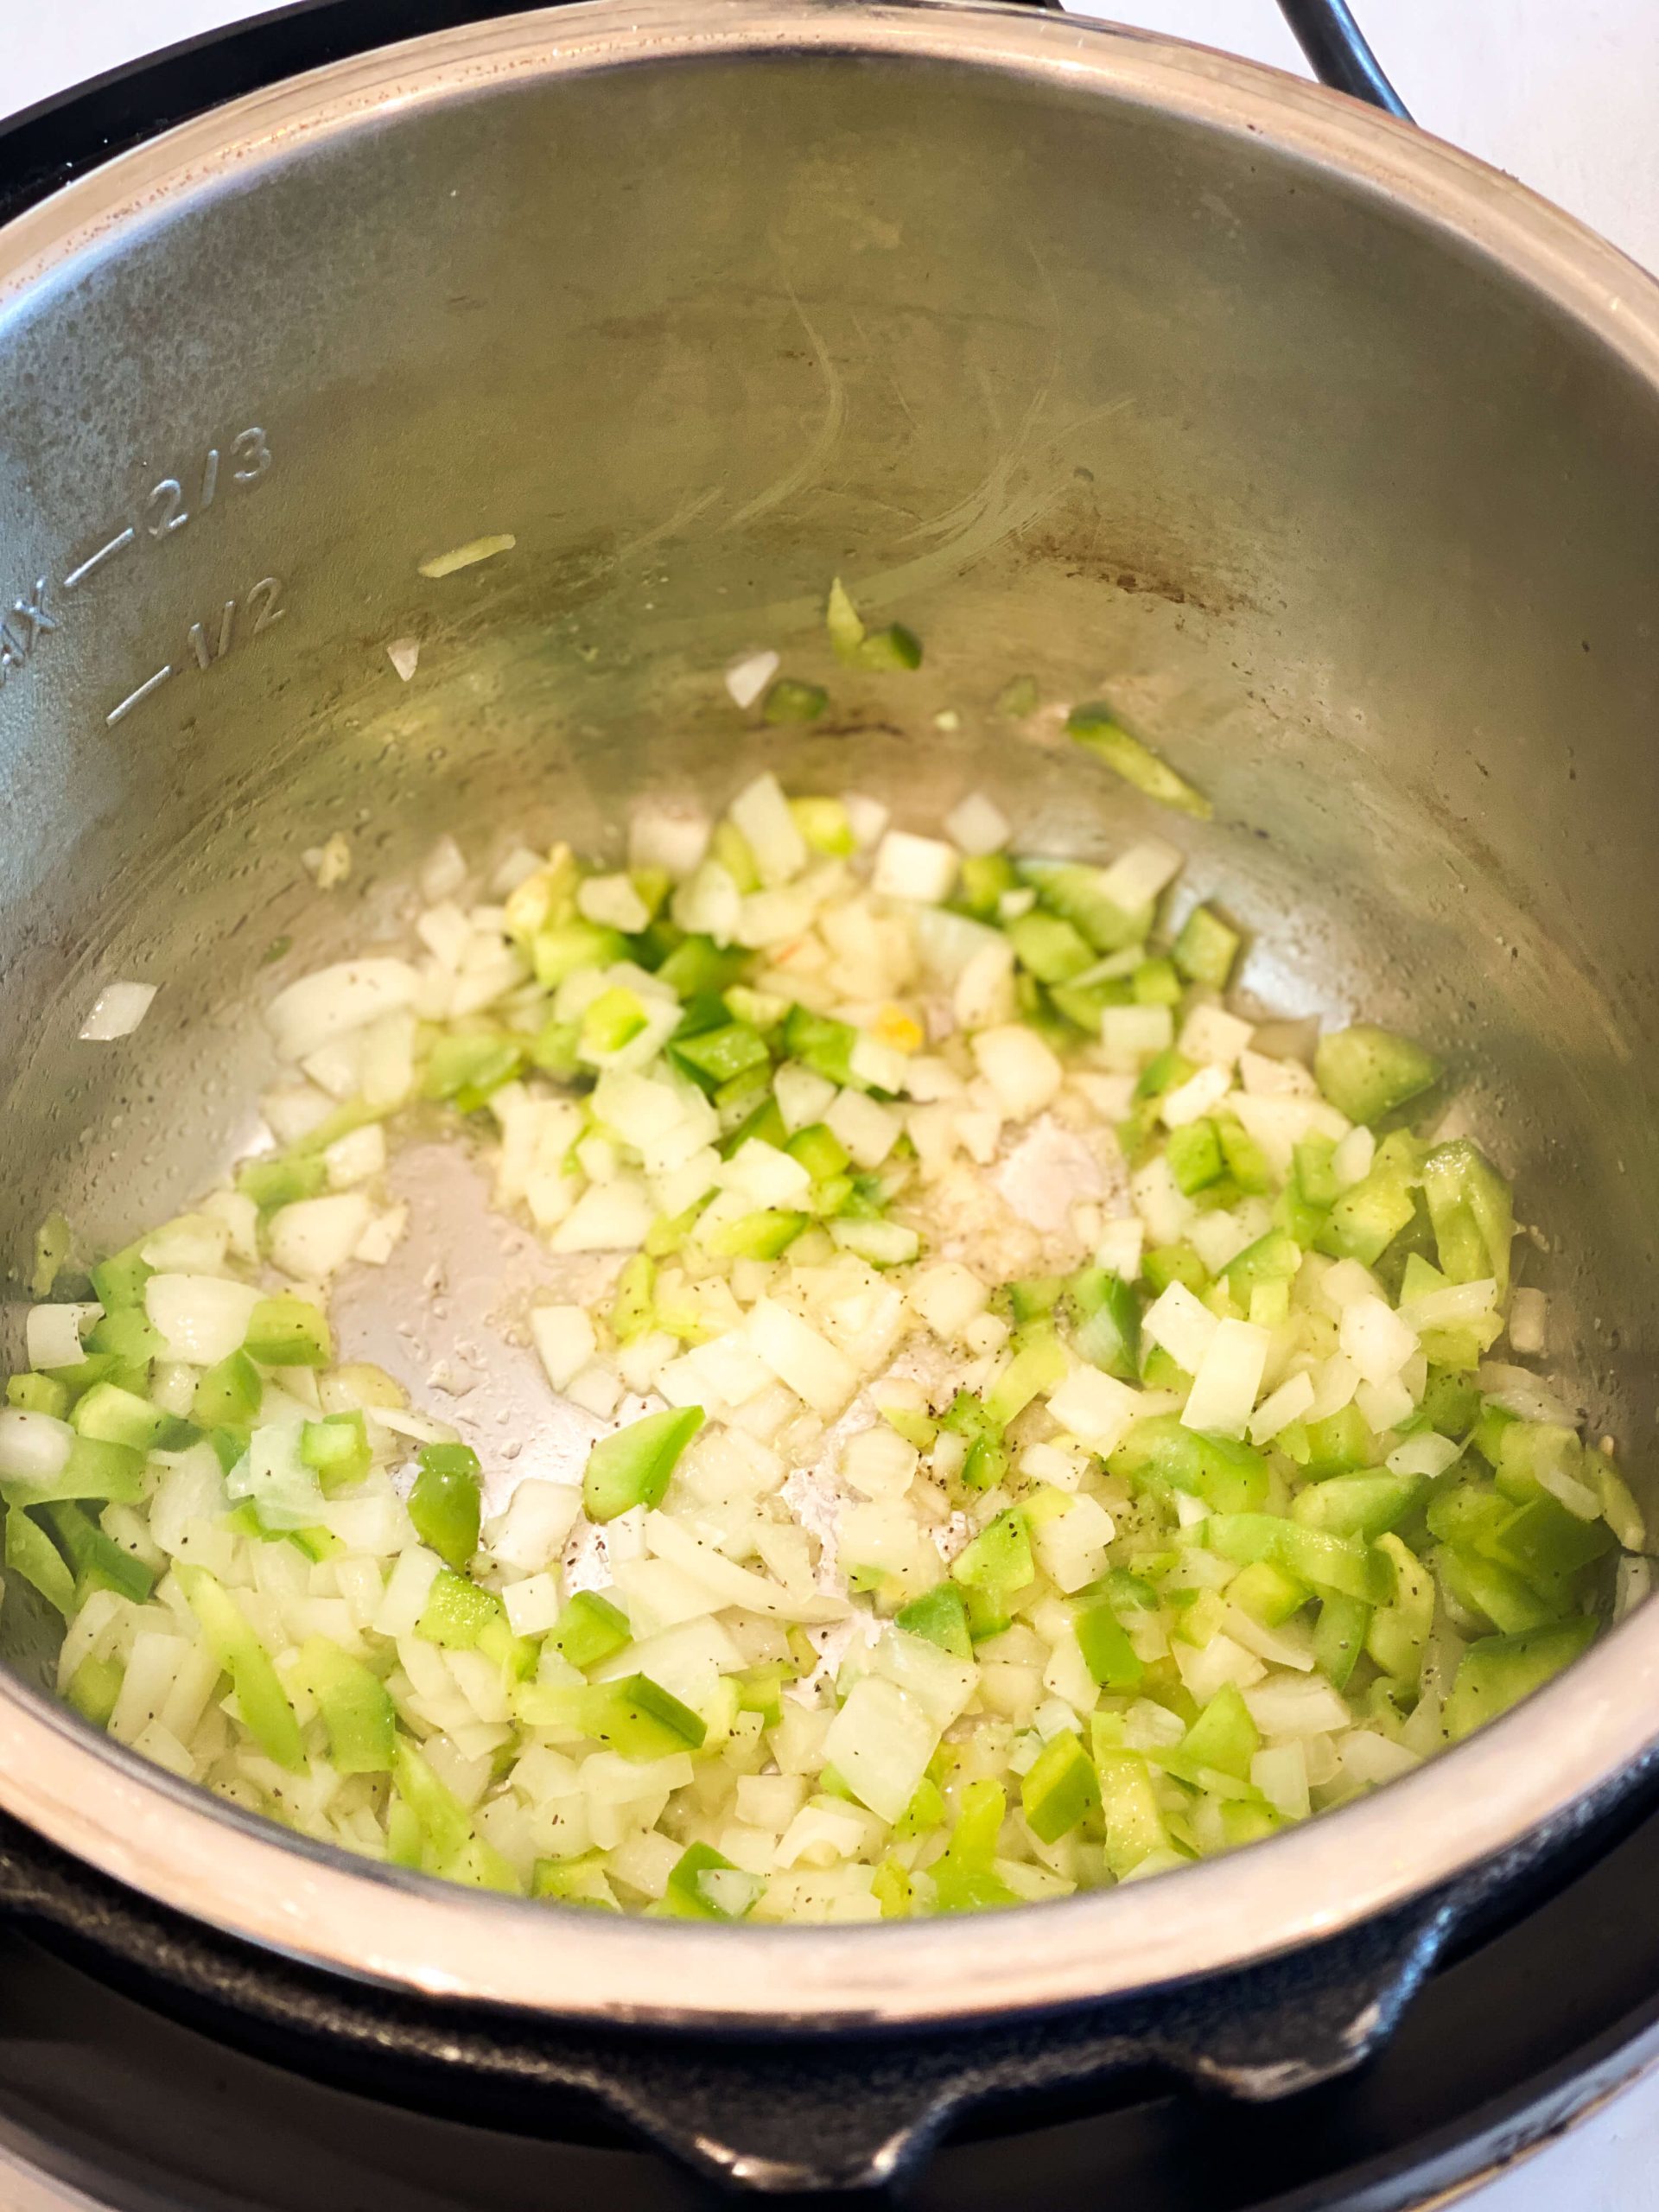 Onions and peppers sautéing 